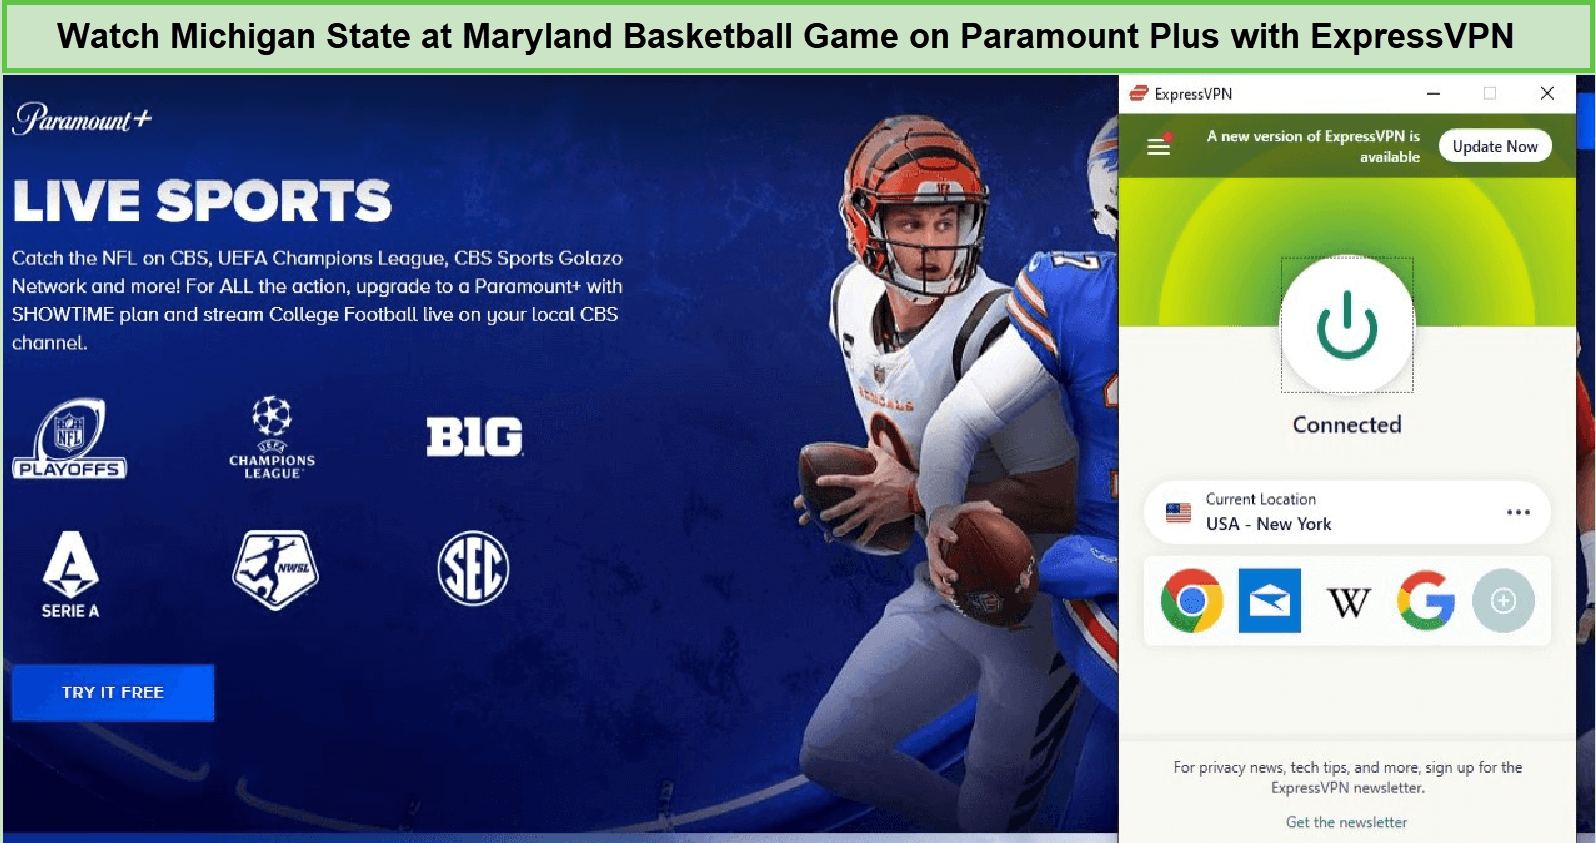 Watch-Michigan-State-at-Maryland-Basketball-Game-in-Australia-on-Paramount-Plus-with-ExpressVPN